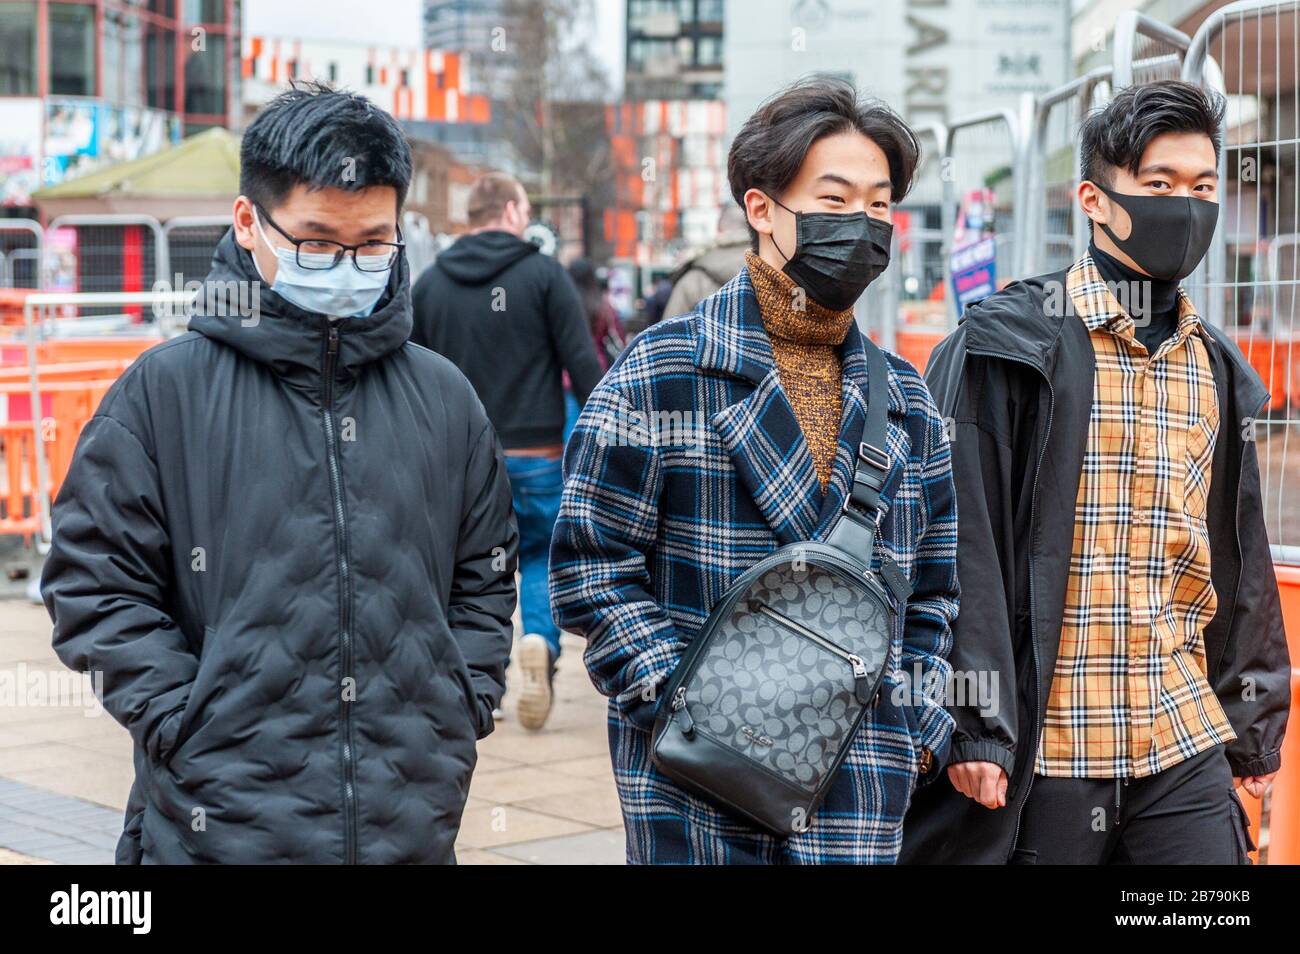 Coventry, West Midlands, UK. 14th Mar, 2020. The Coronavirus pandemic forced shoppers to wear protective masks in a virtually deserted Coventry city centre this morning. Credit: Andy Gibson/Alamy Live News Stock Photo